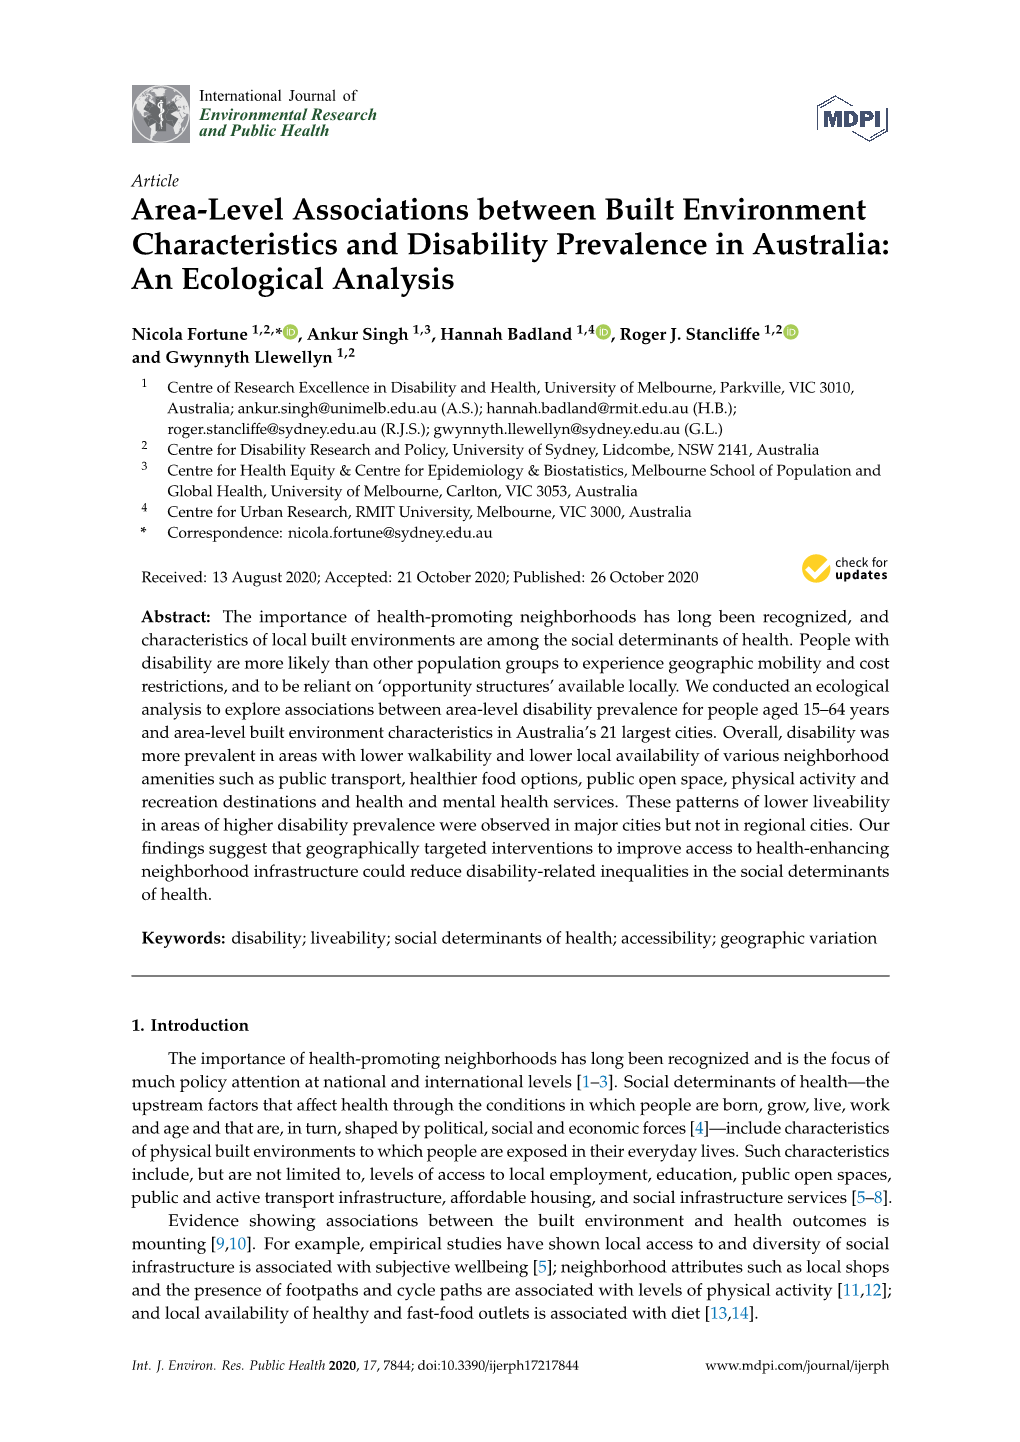 Area-Level Associations Between Built Environment Characteristics and Disability Prevalence in Australia: an Ecological Analysis